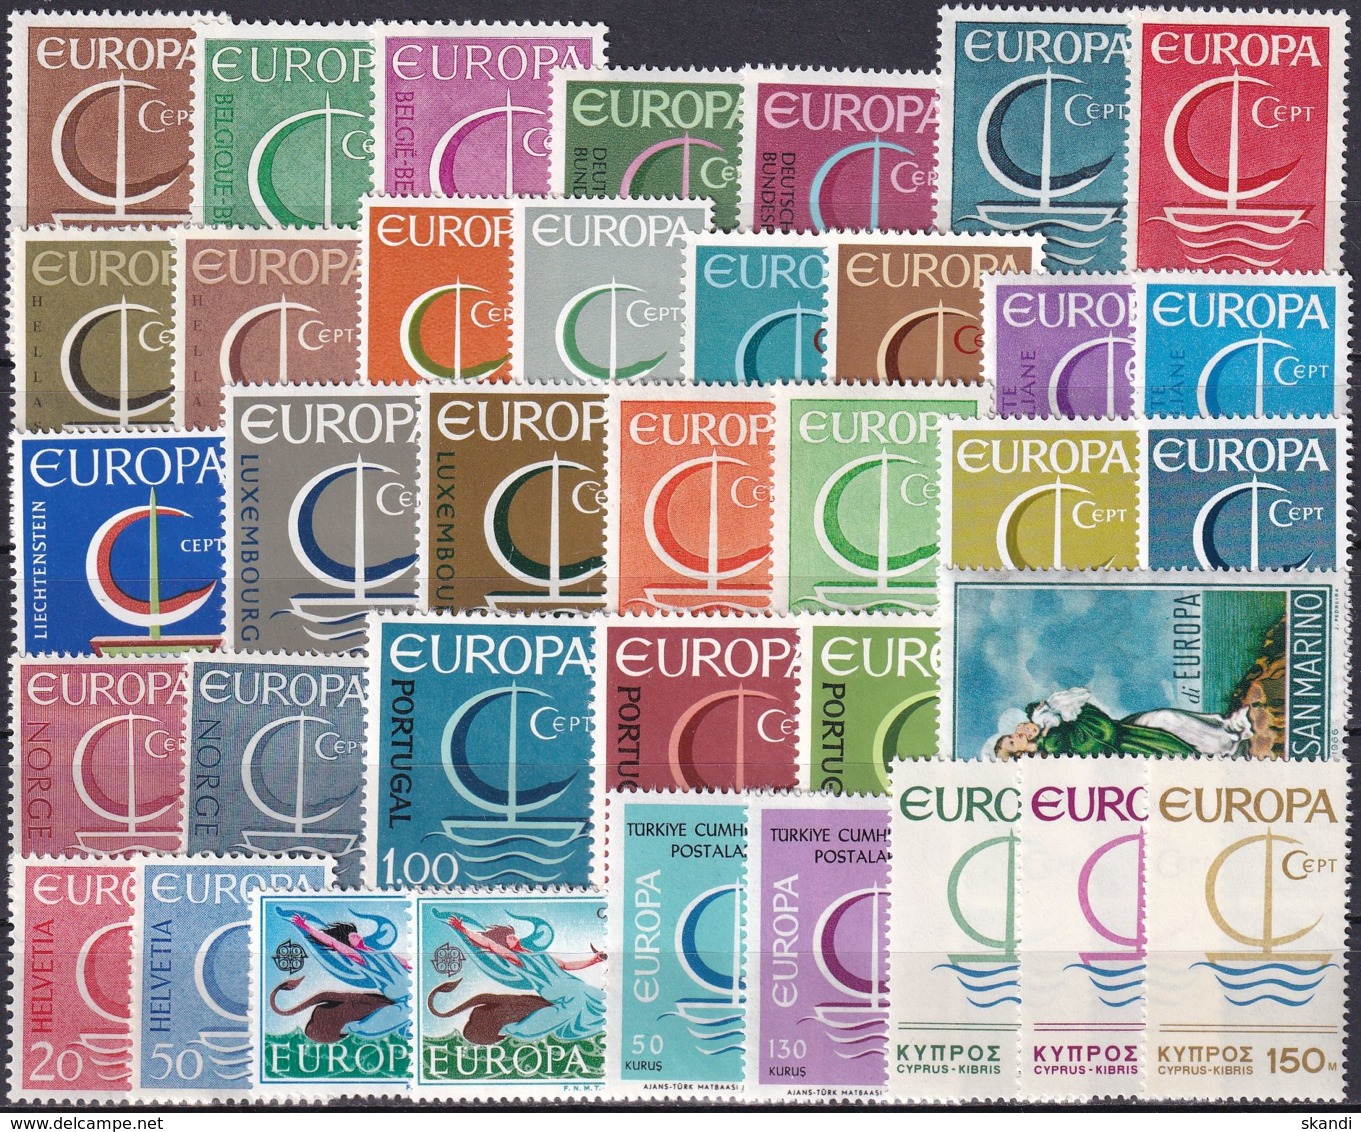 EUROPA - CEPT Jahrgang 1966 Complete Year Set ** MNH - 1966